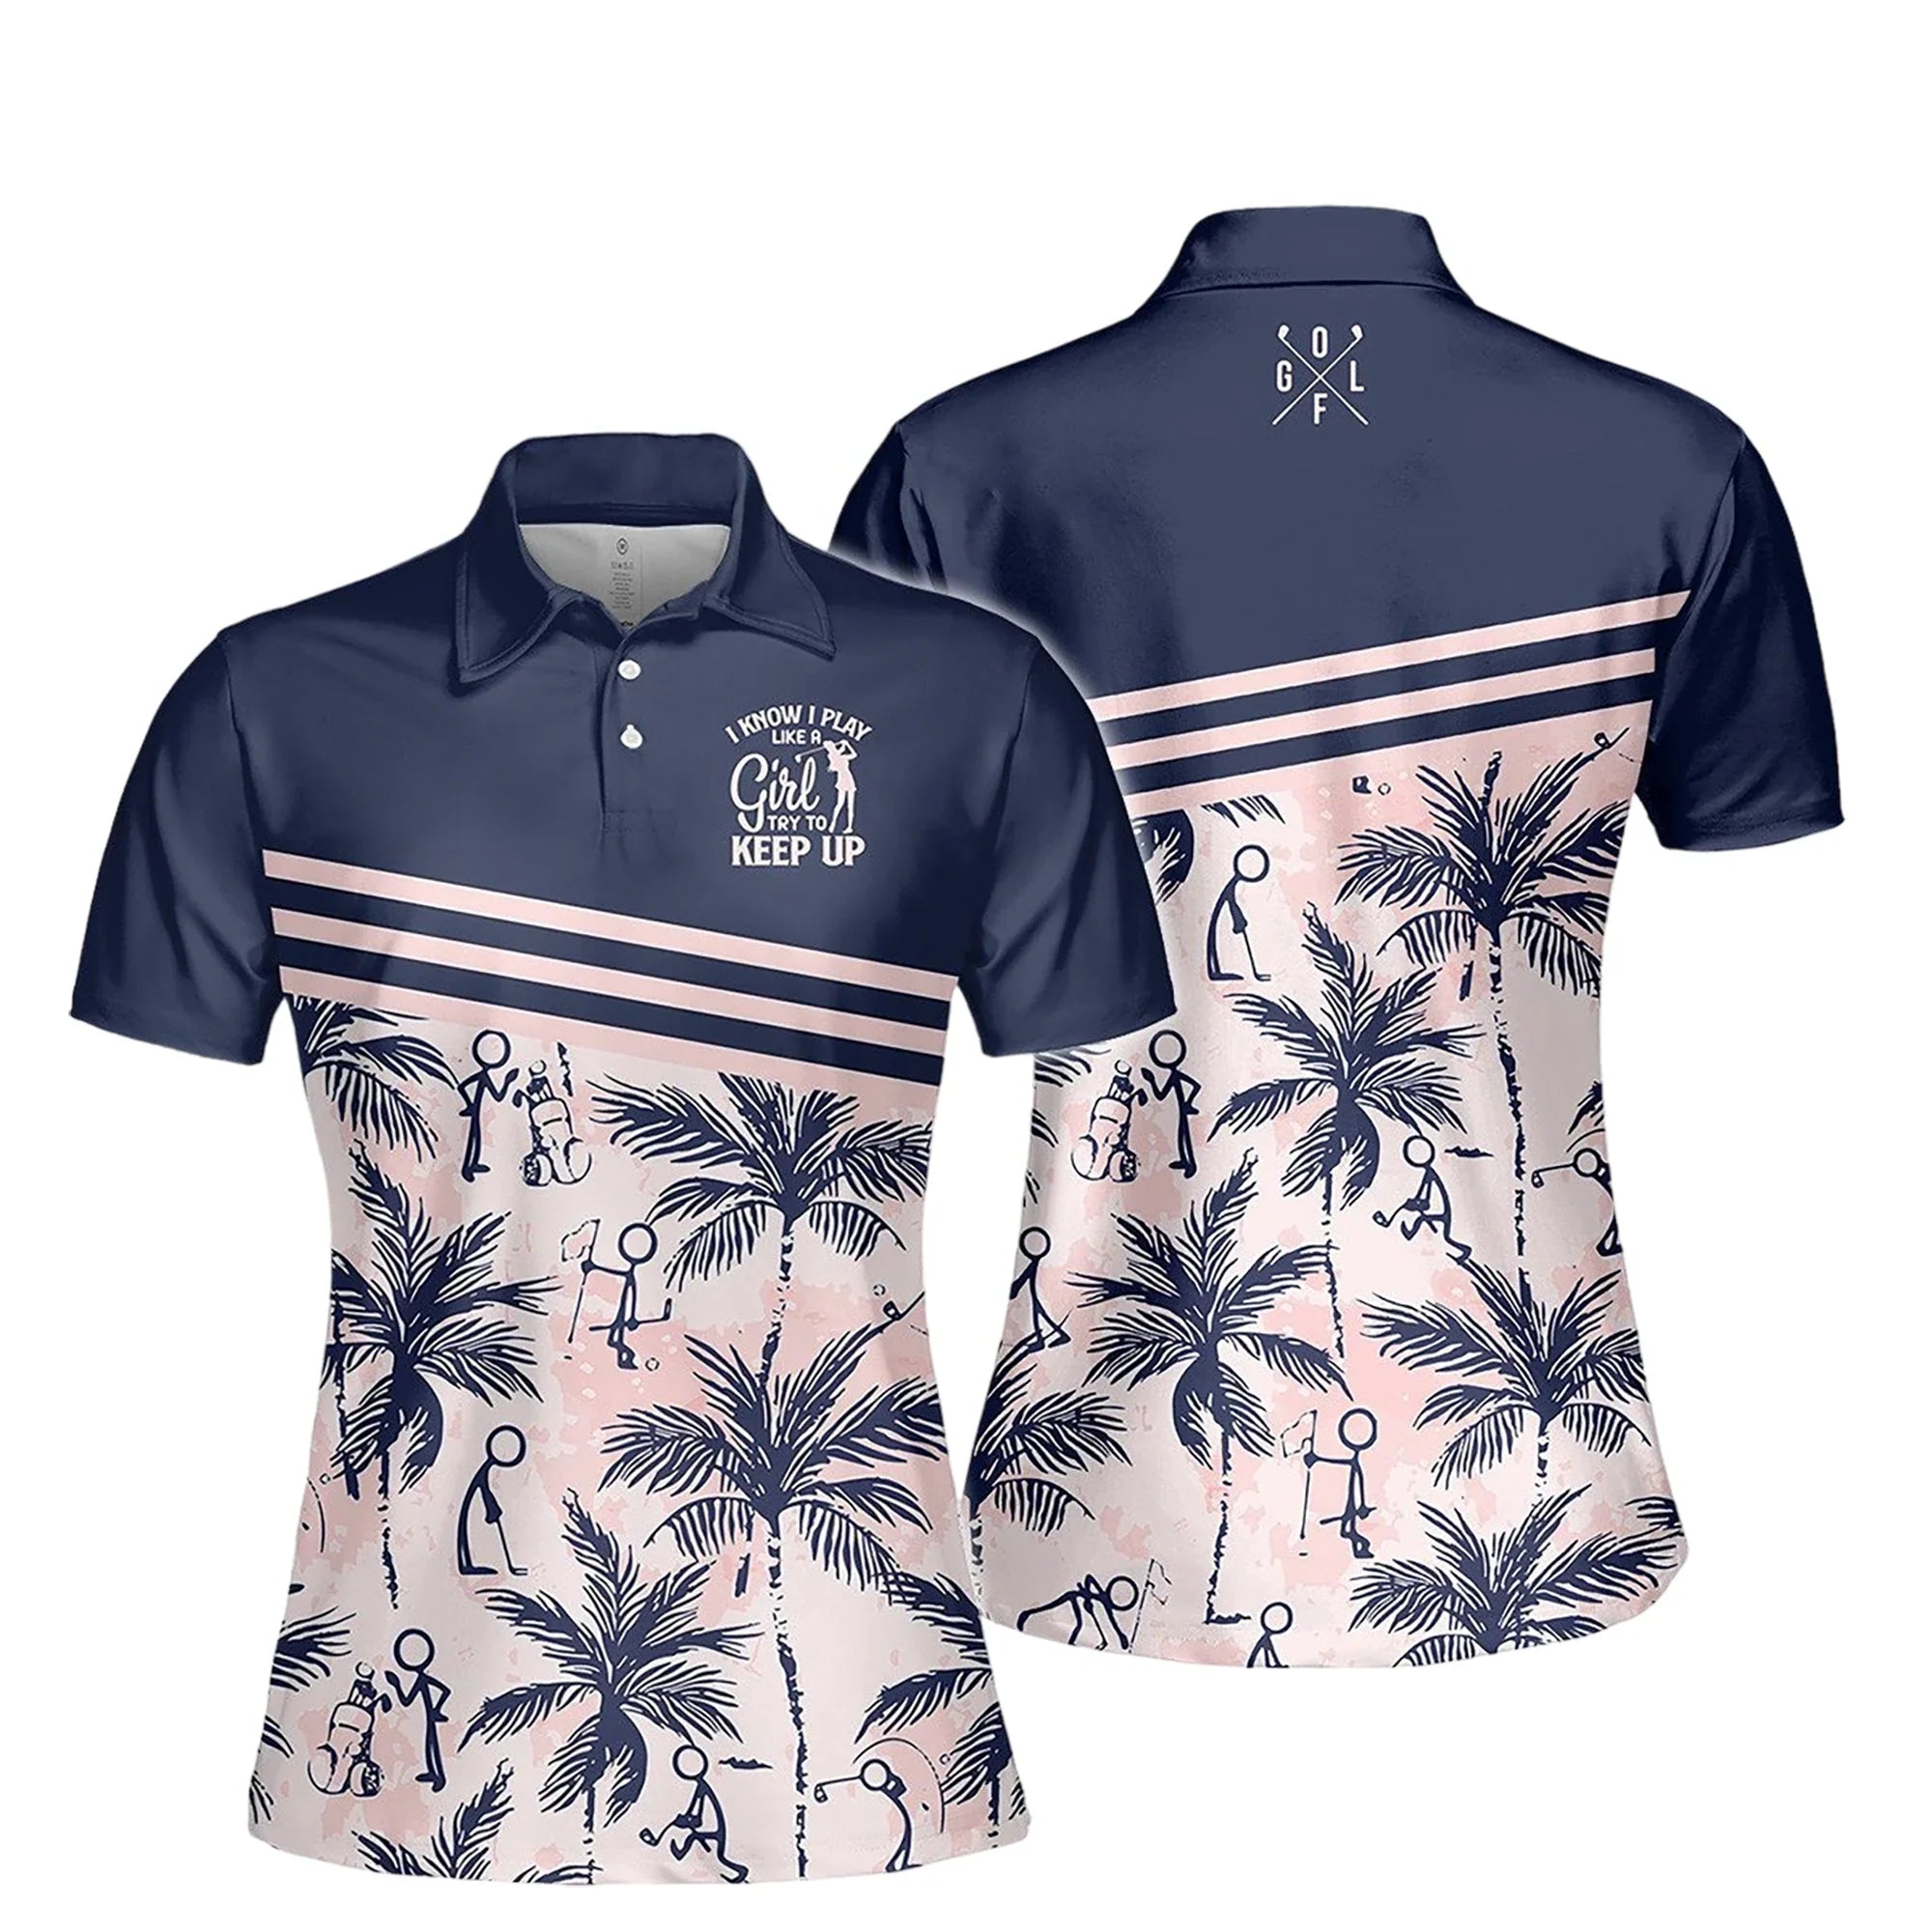 Try To Keep Up V3 Women Short Sleeve Polo Shirt/ Women’s Jersey Polo Shirt